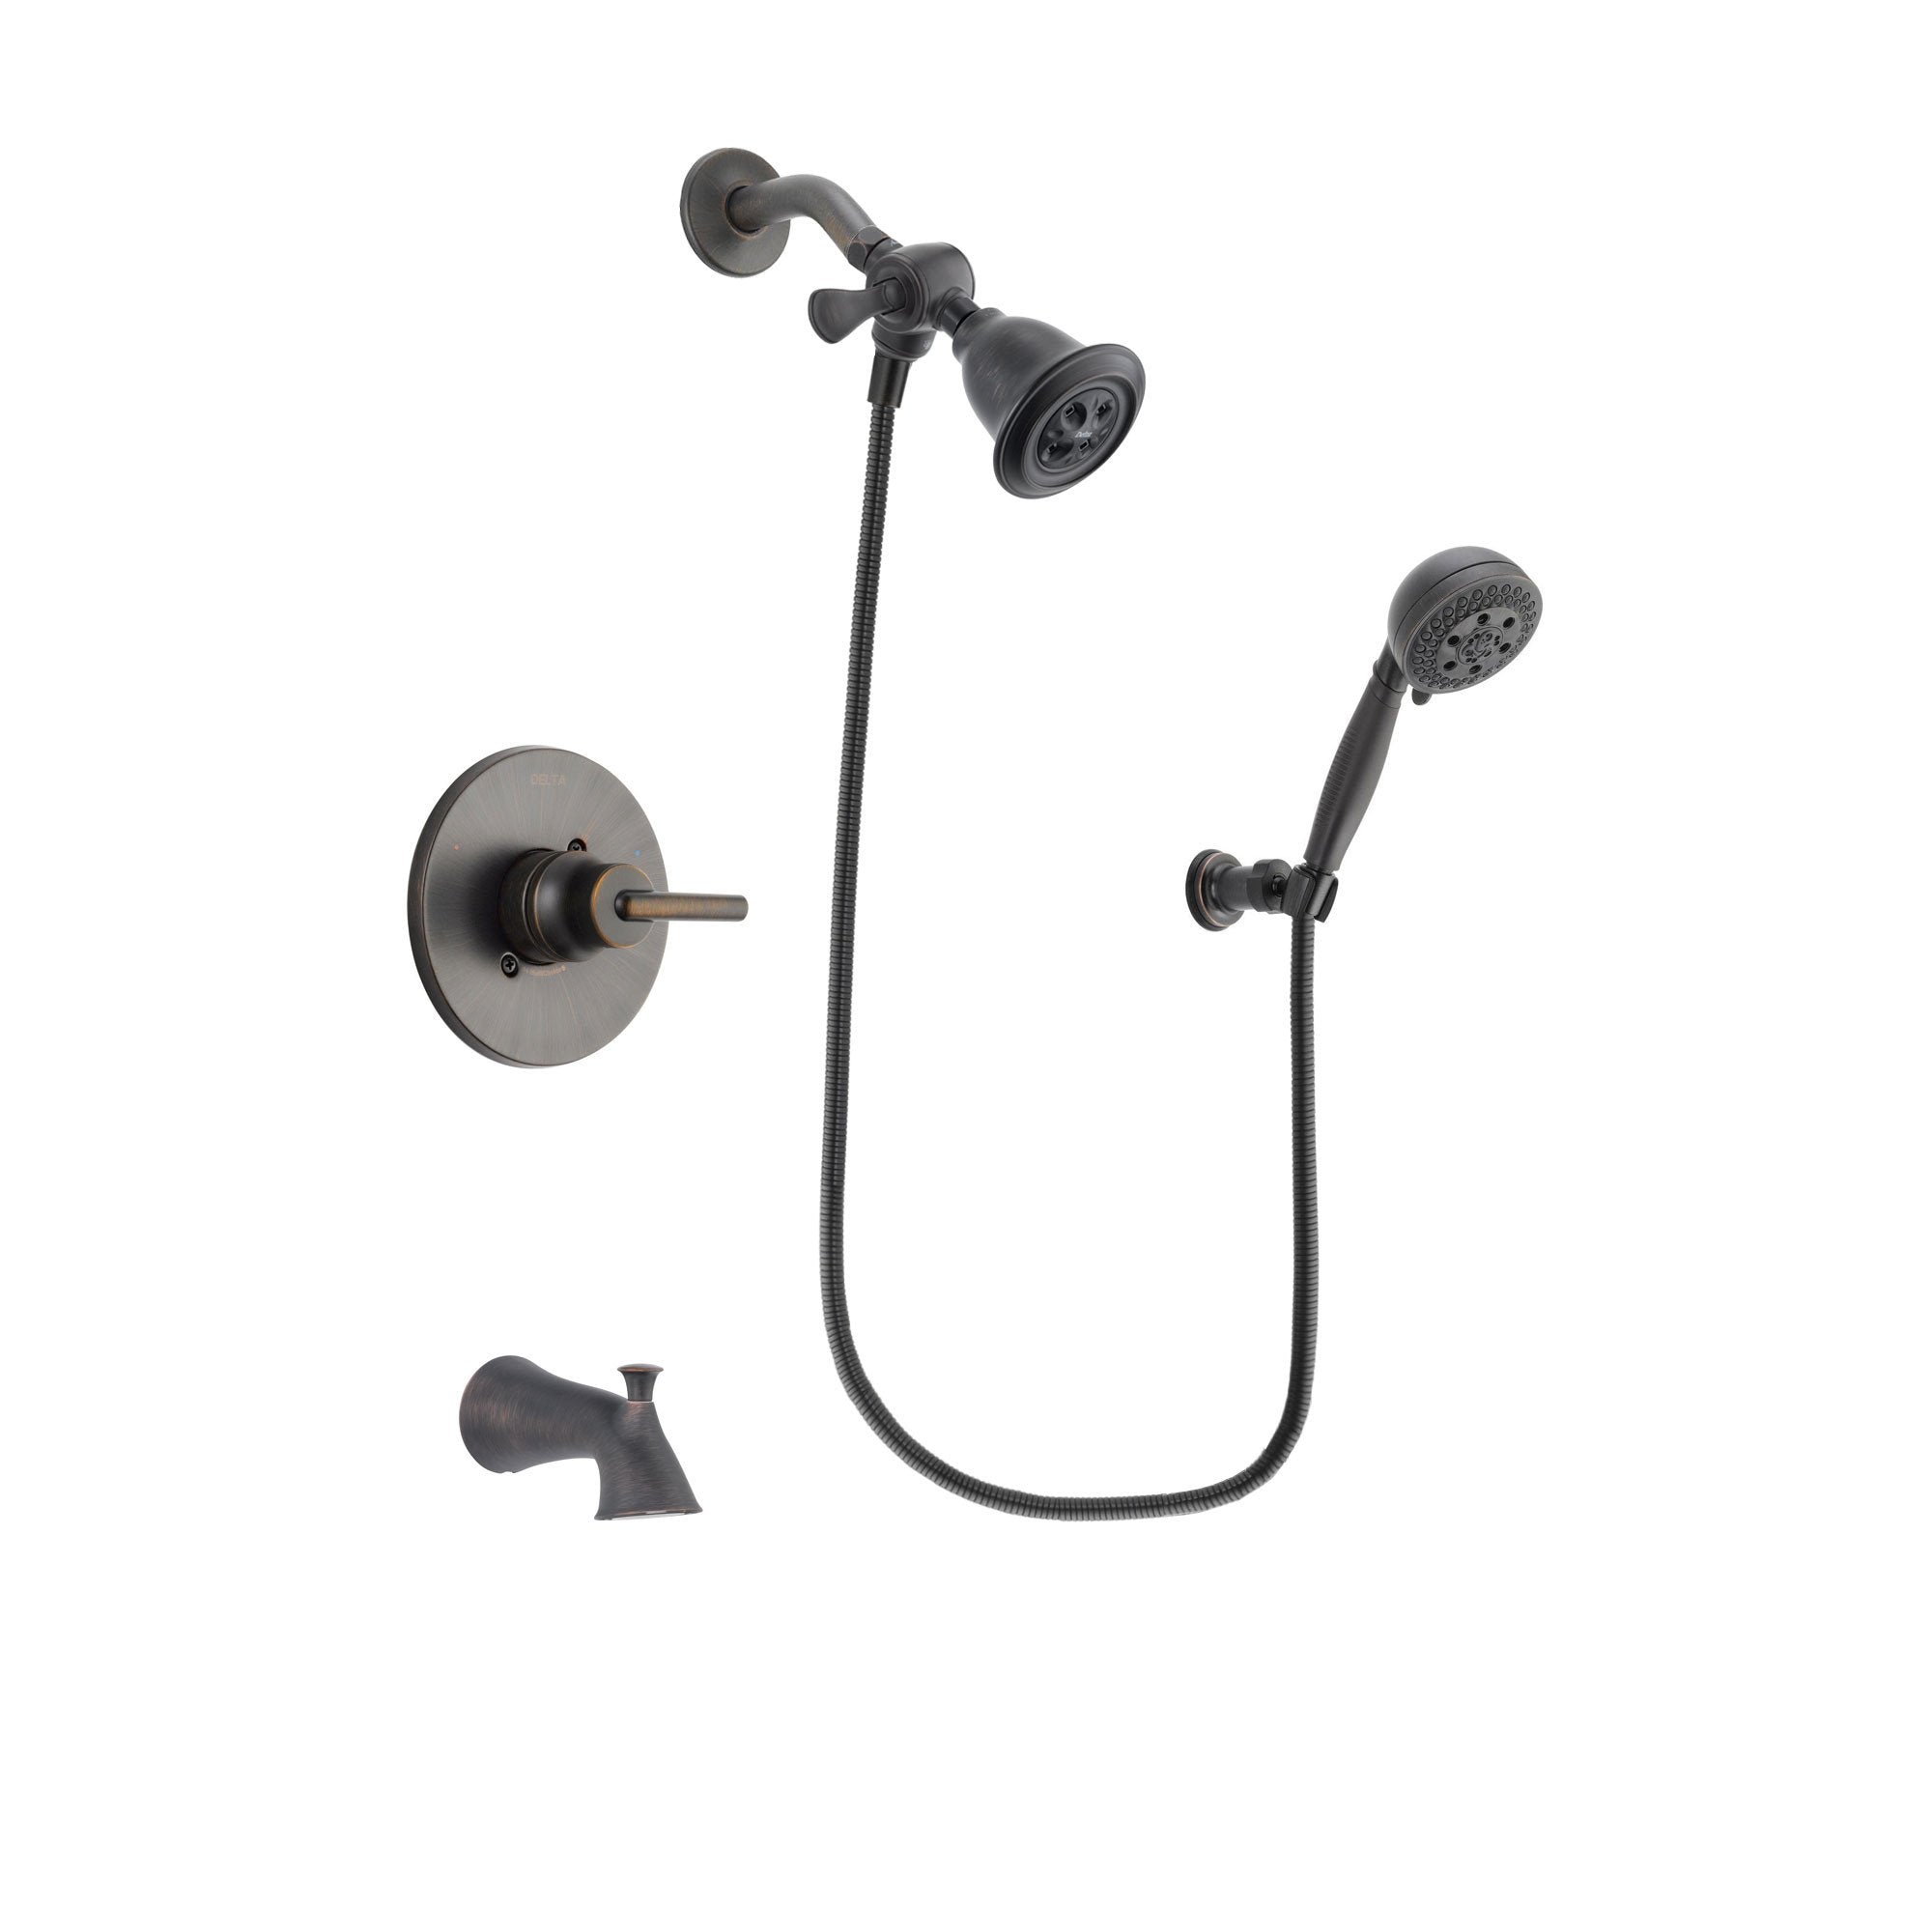 Delta Trinsic Venetian Bronze Finish Tub and Shower Faucet System Package with Water Efficient Showerhead and 5-Setting Wall Mount Personal Handheld Shower Spray Includes Rough-in Valve and Tub Spout DSP2783V